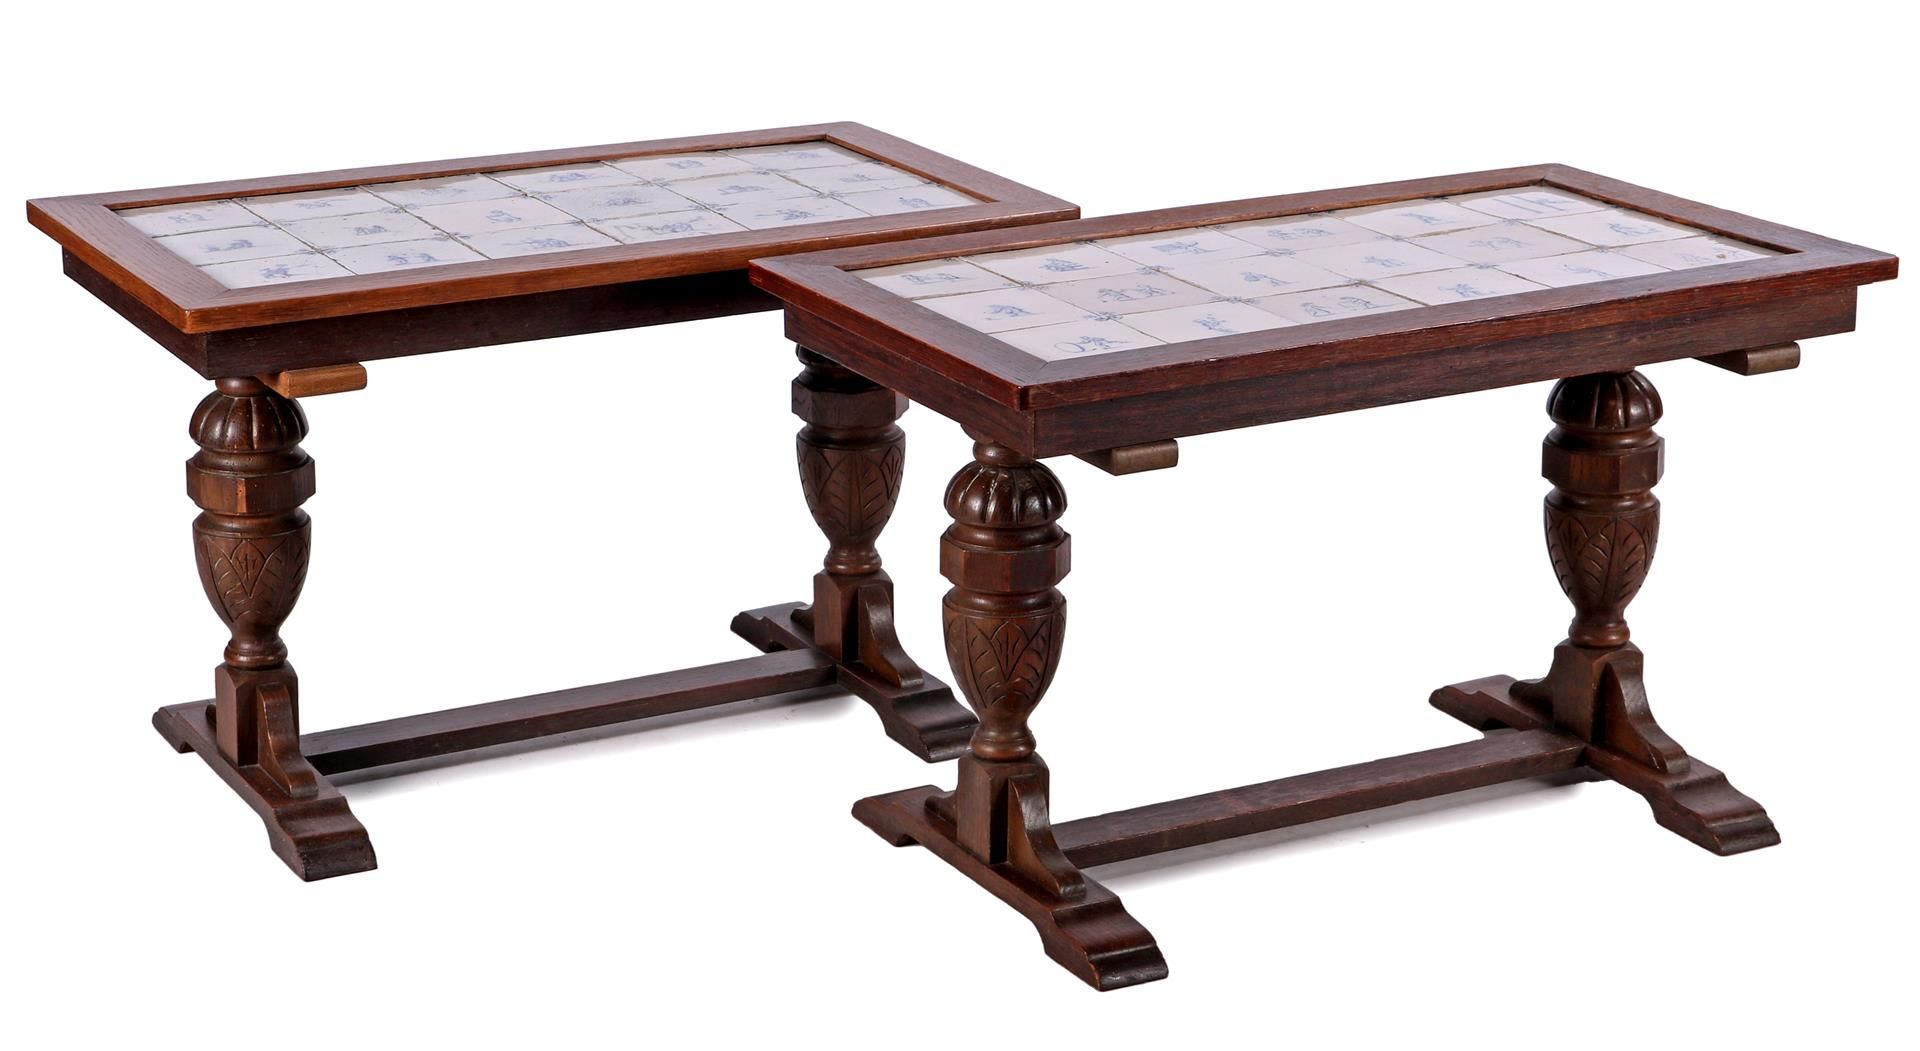 2 oak monastery tables with inlaid earthenware tiles